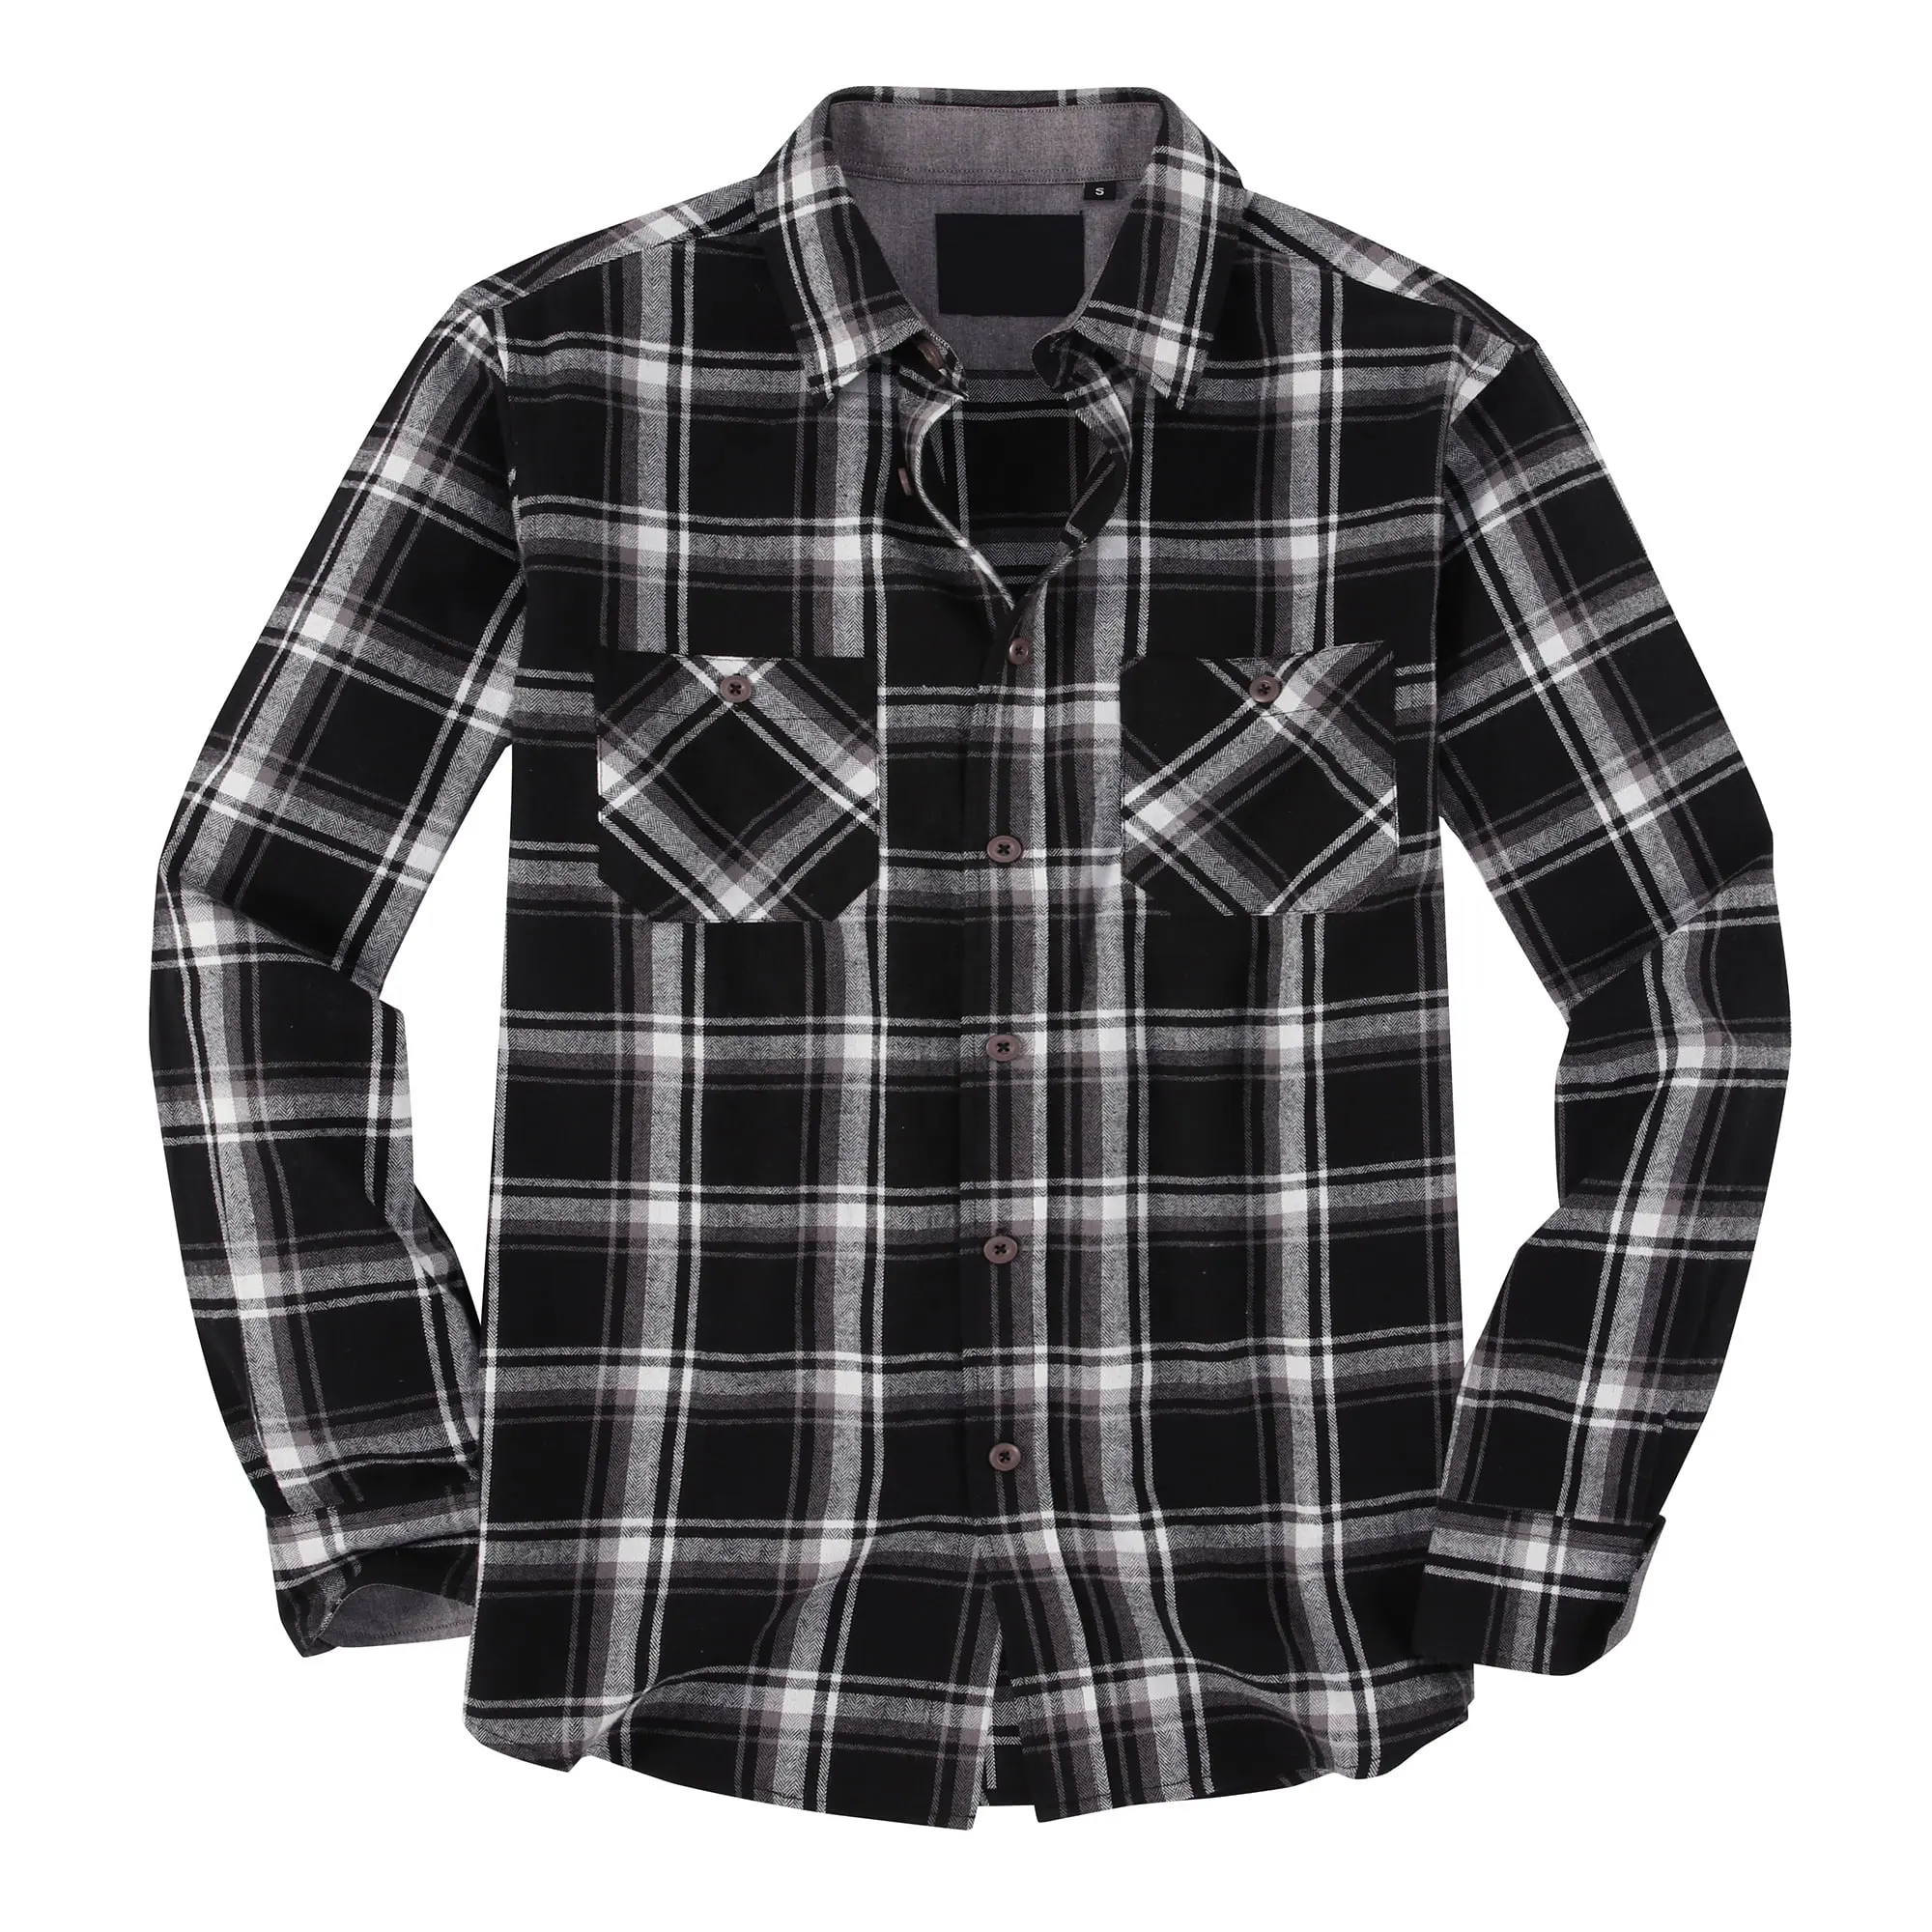 Comfortable Best Selling Men Flannel Over Shirts Casual Wear Vacation Over Shirts For Sale On Wholesale Rates Men's Shirts